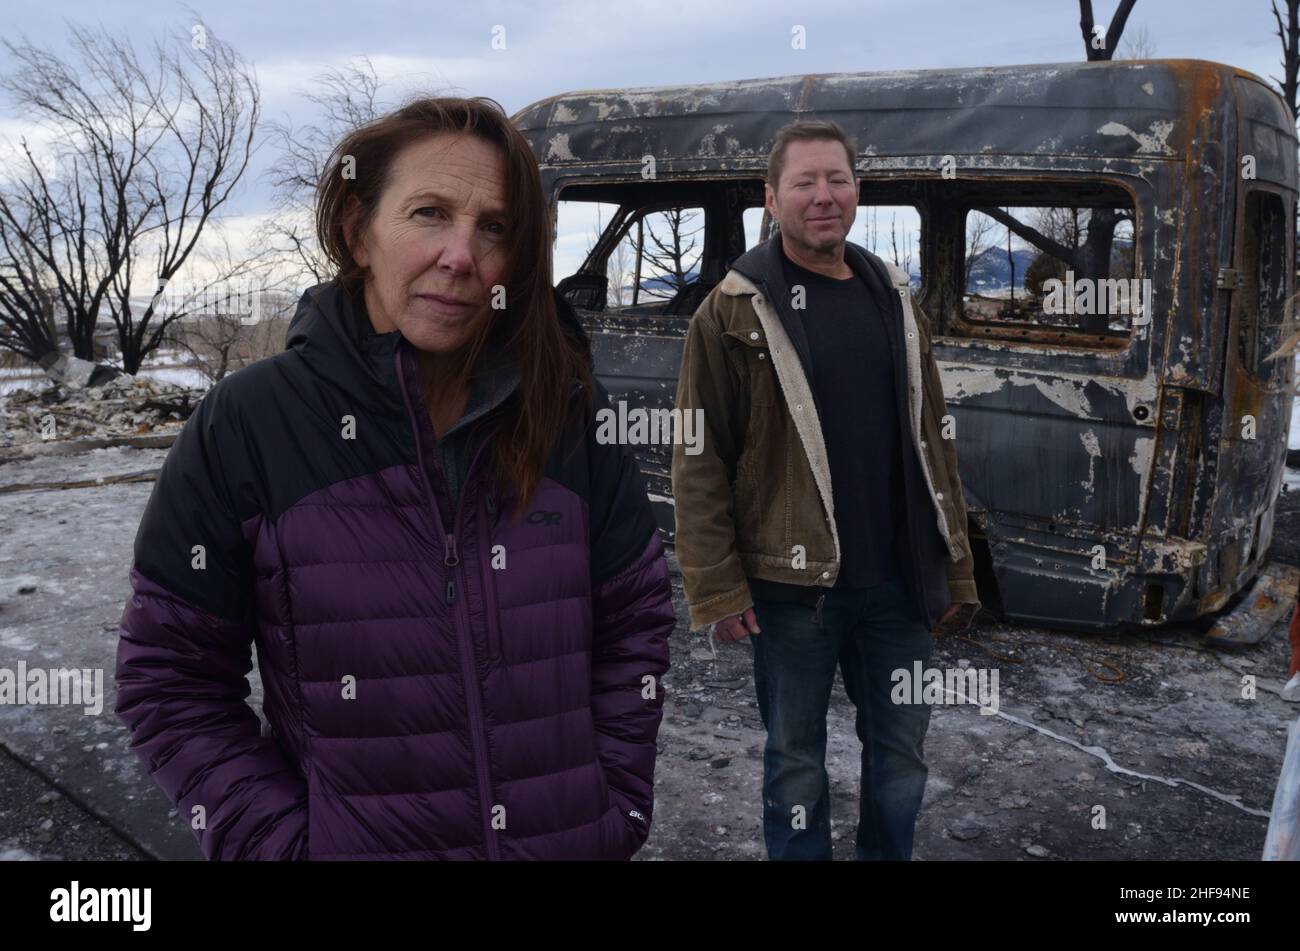 Marshall Fire victims Cheryl and Nathan Ruff stand in front of a burned-out van in what used to be their garage. The Ruffs have two children. Stock Photo